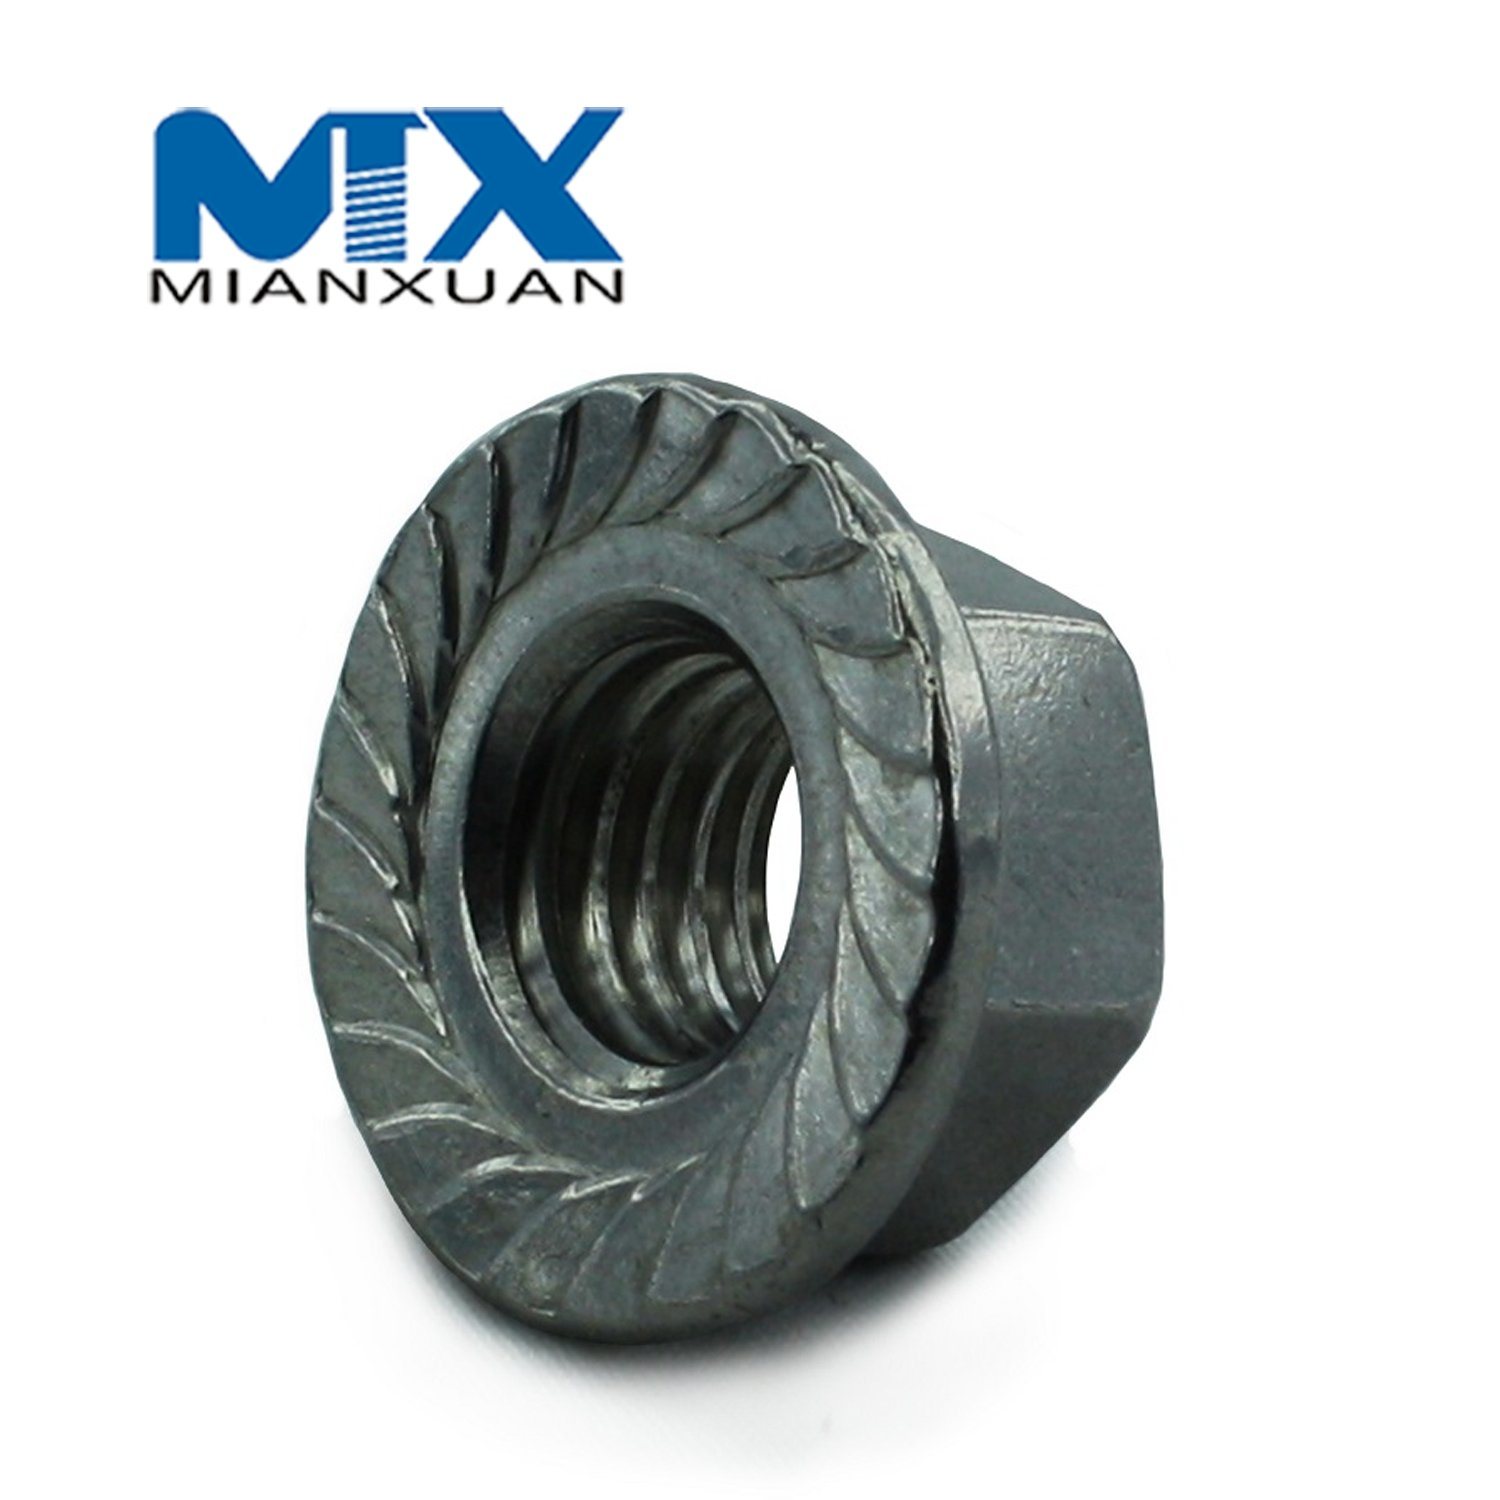 Hex Lock Nut Flange GB1587 with Knurled No-Knurled